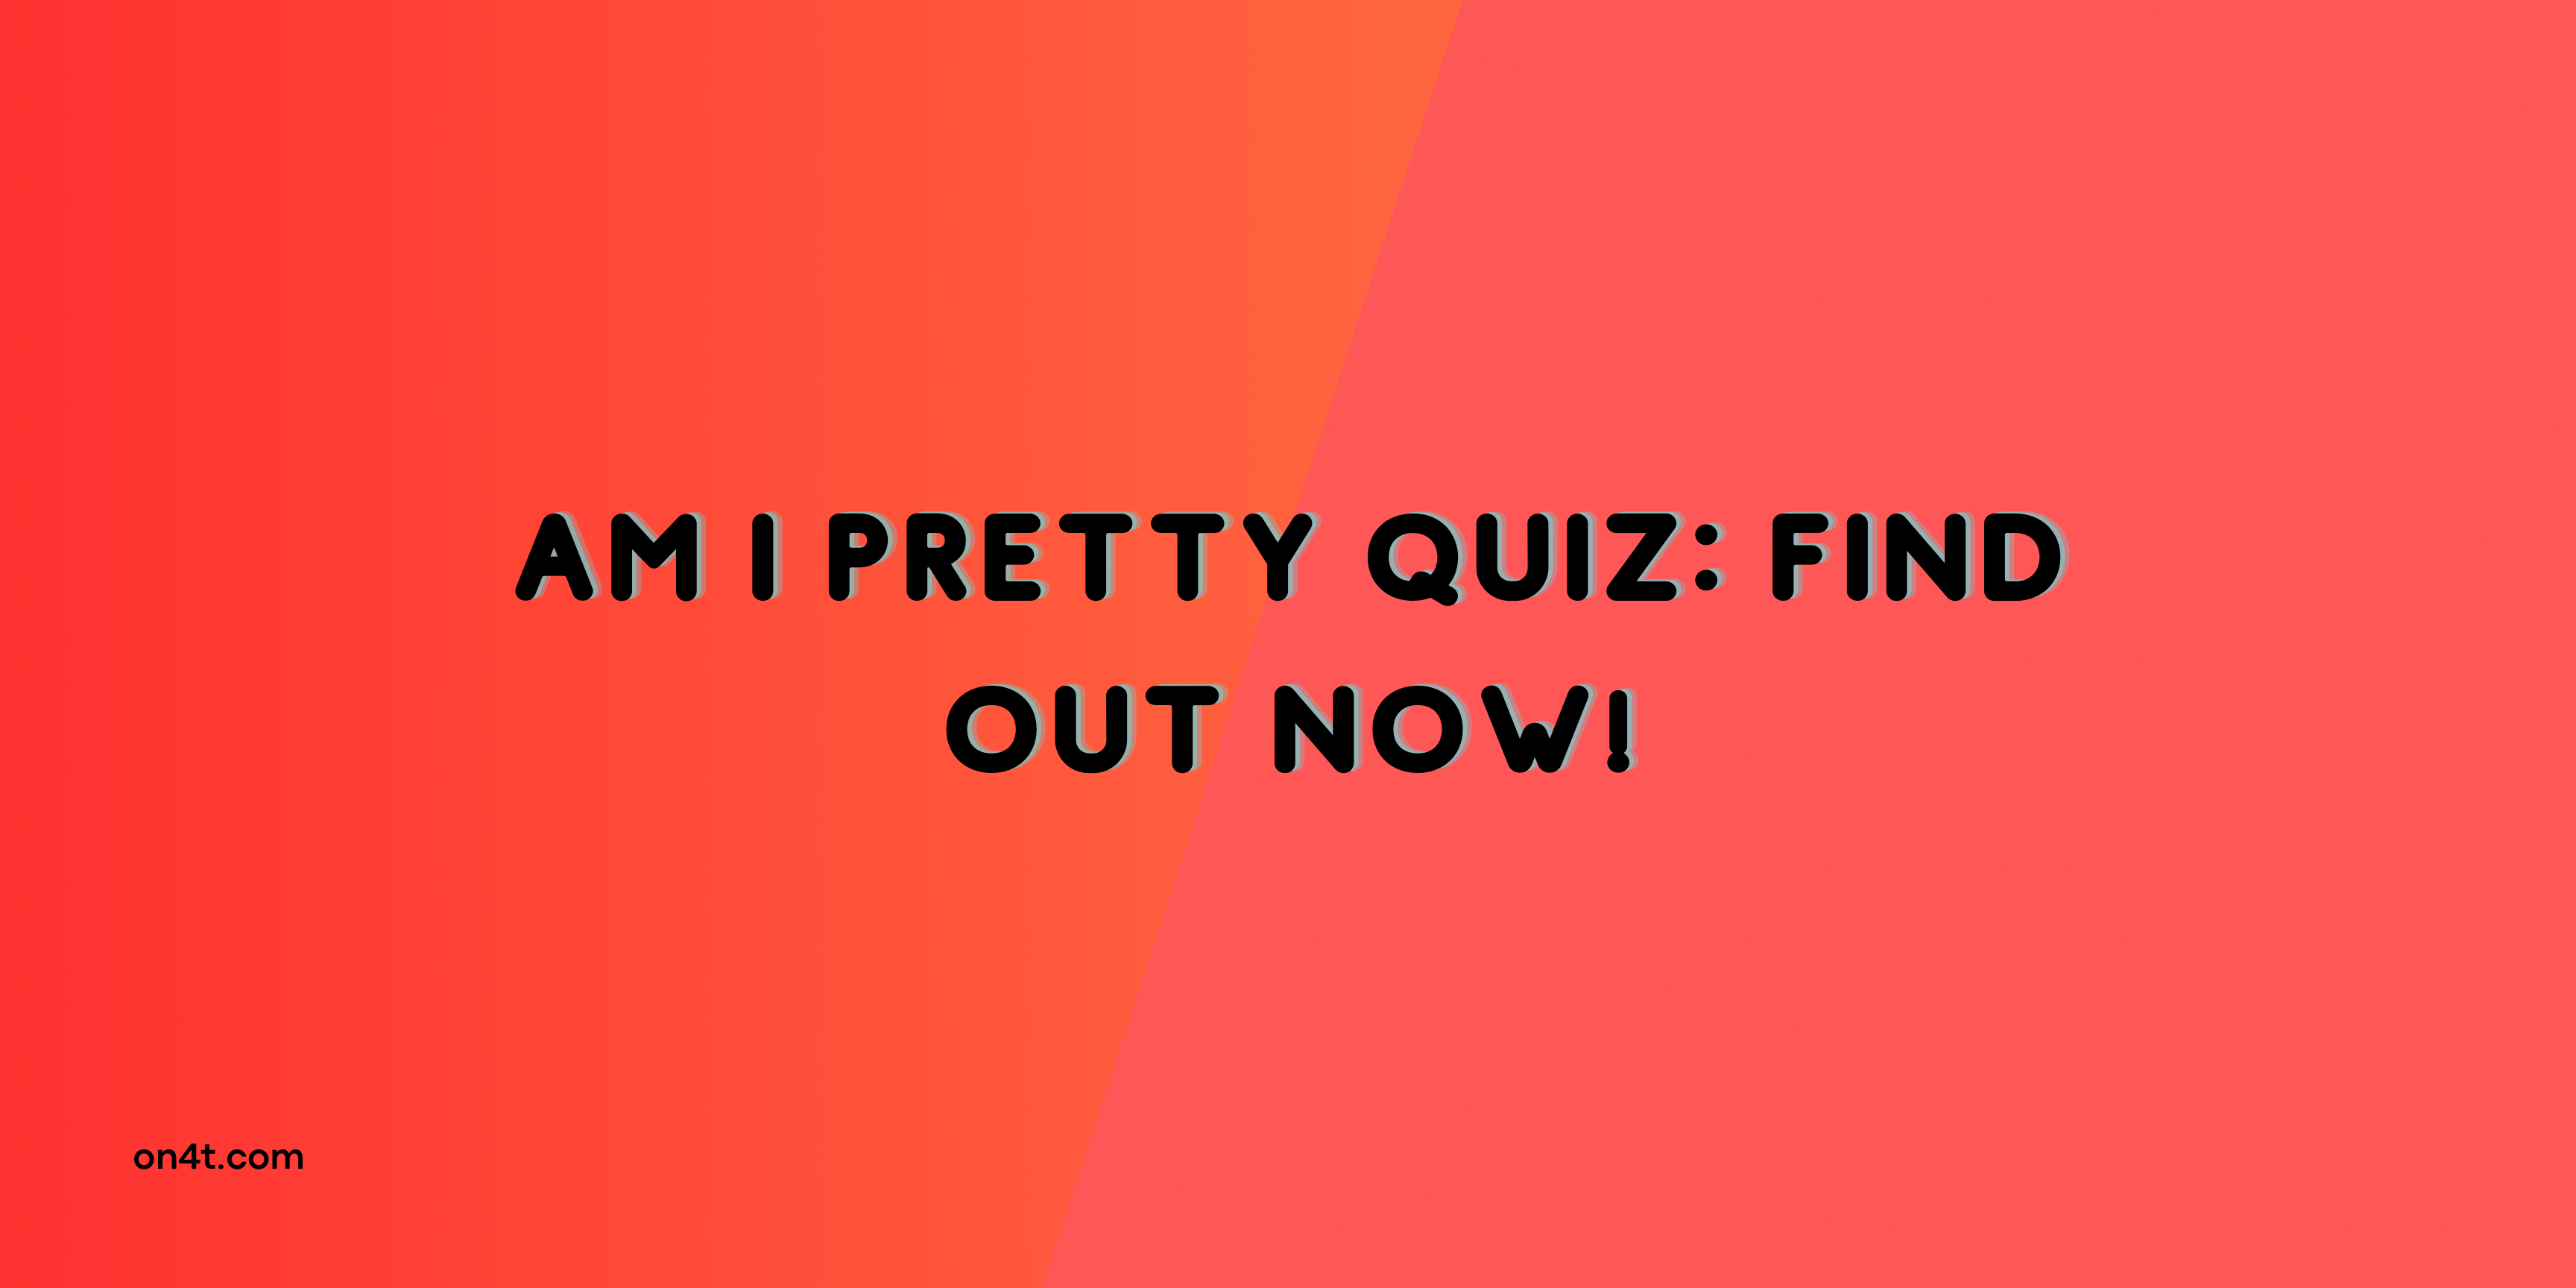 Am I Pretty Quiz: Find Out Now!